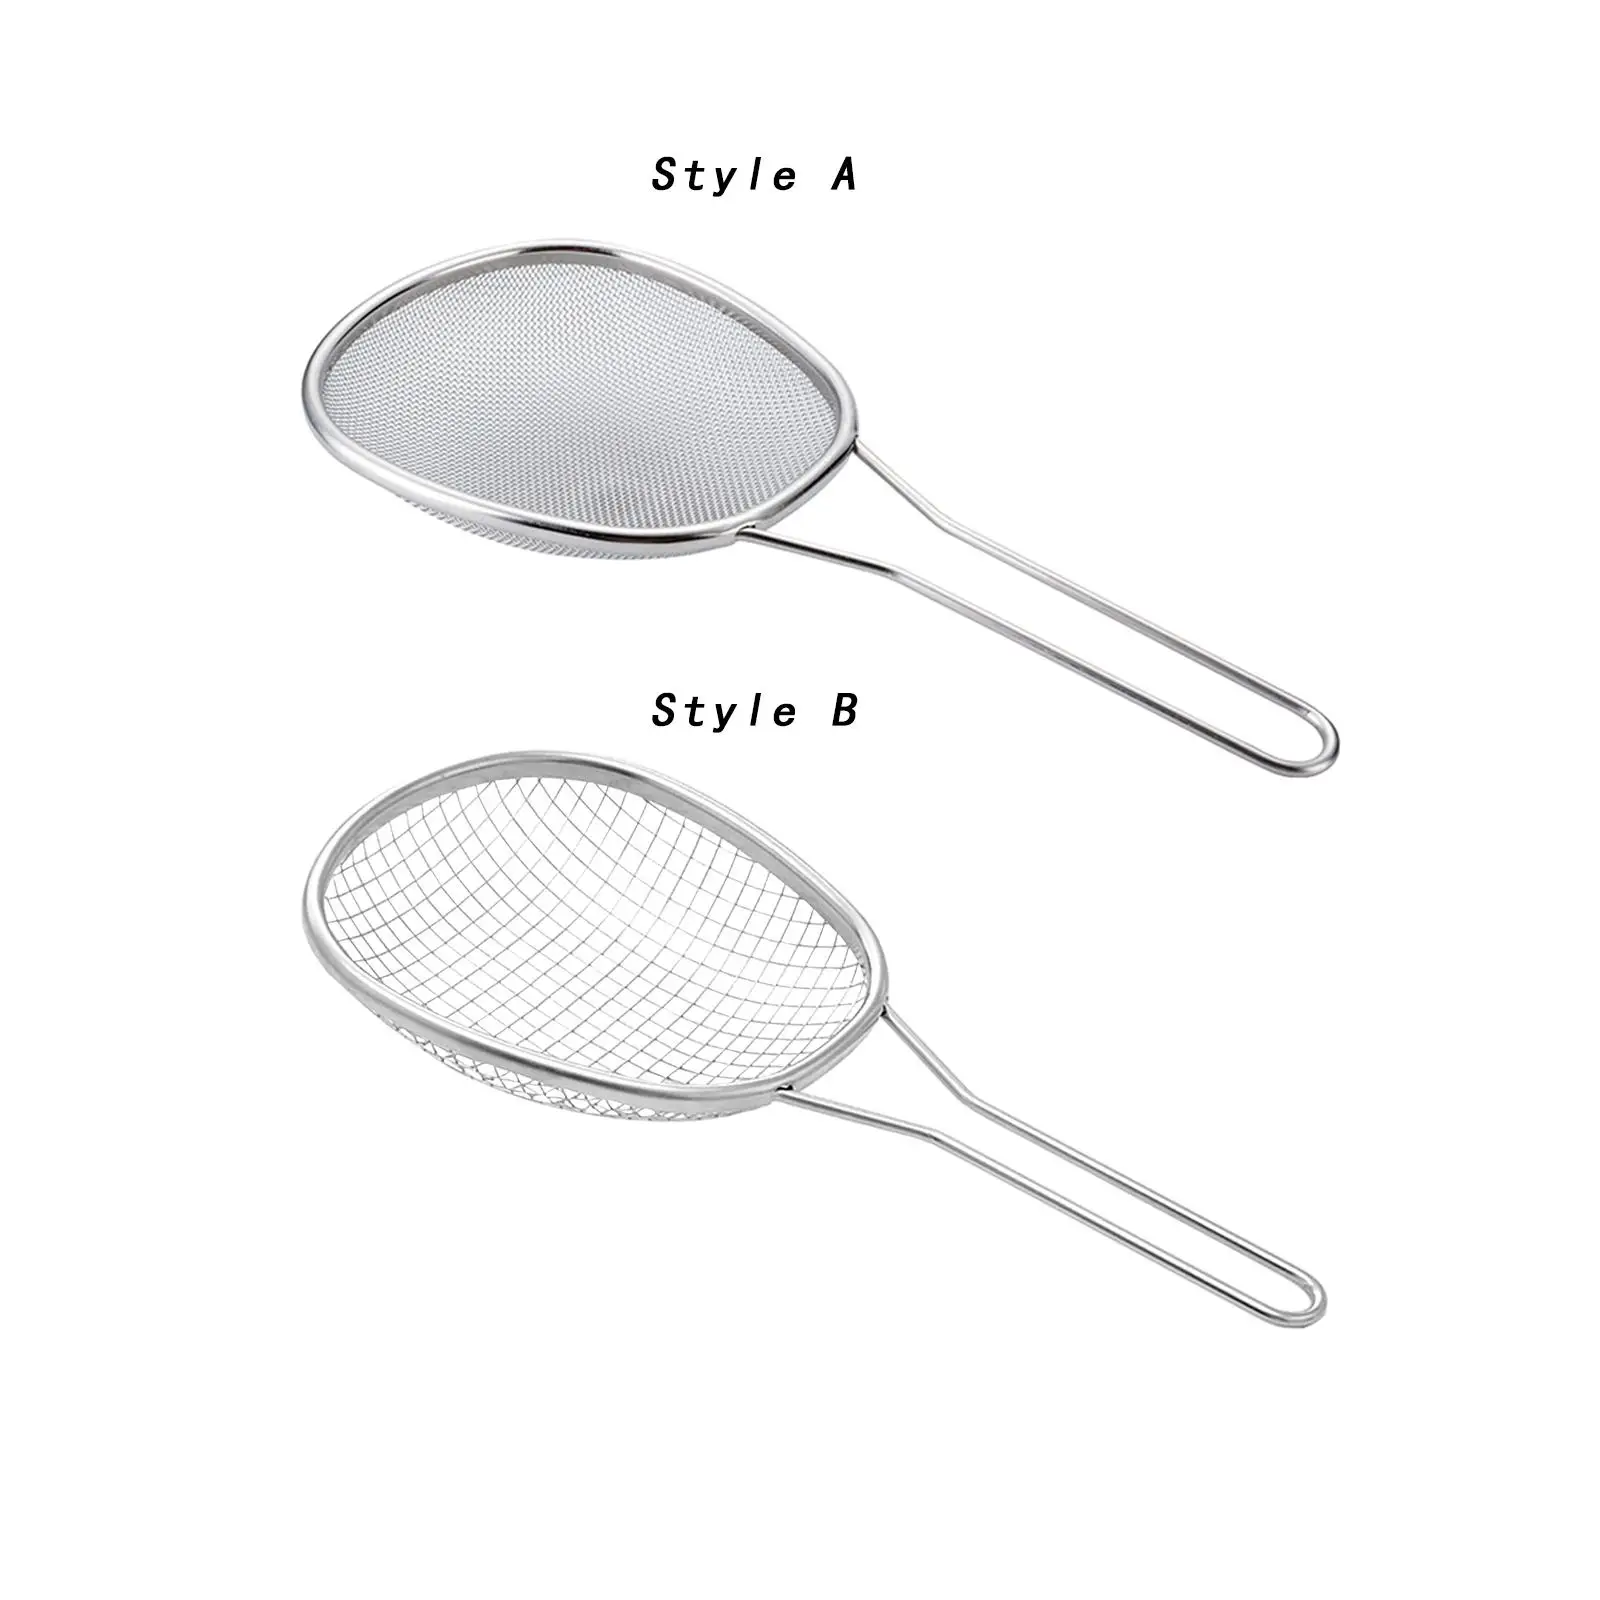 Stainless Steel Mesh Kitchen Strainer with Handle Tea Coffee Juice Strainer for Tea Powdered Sugar Sifting Flour Juice Vegetable